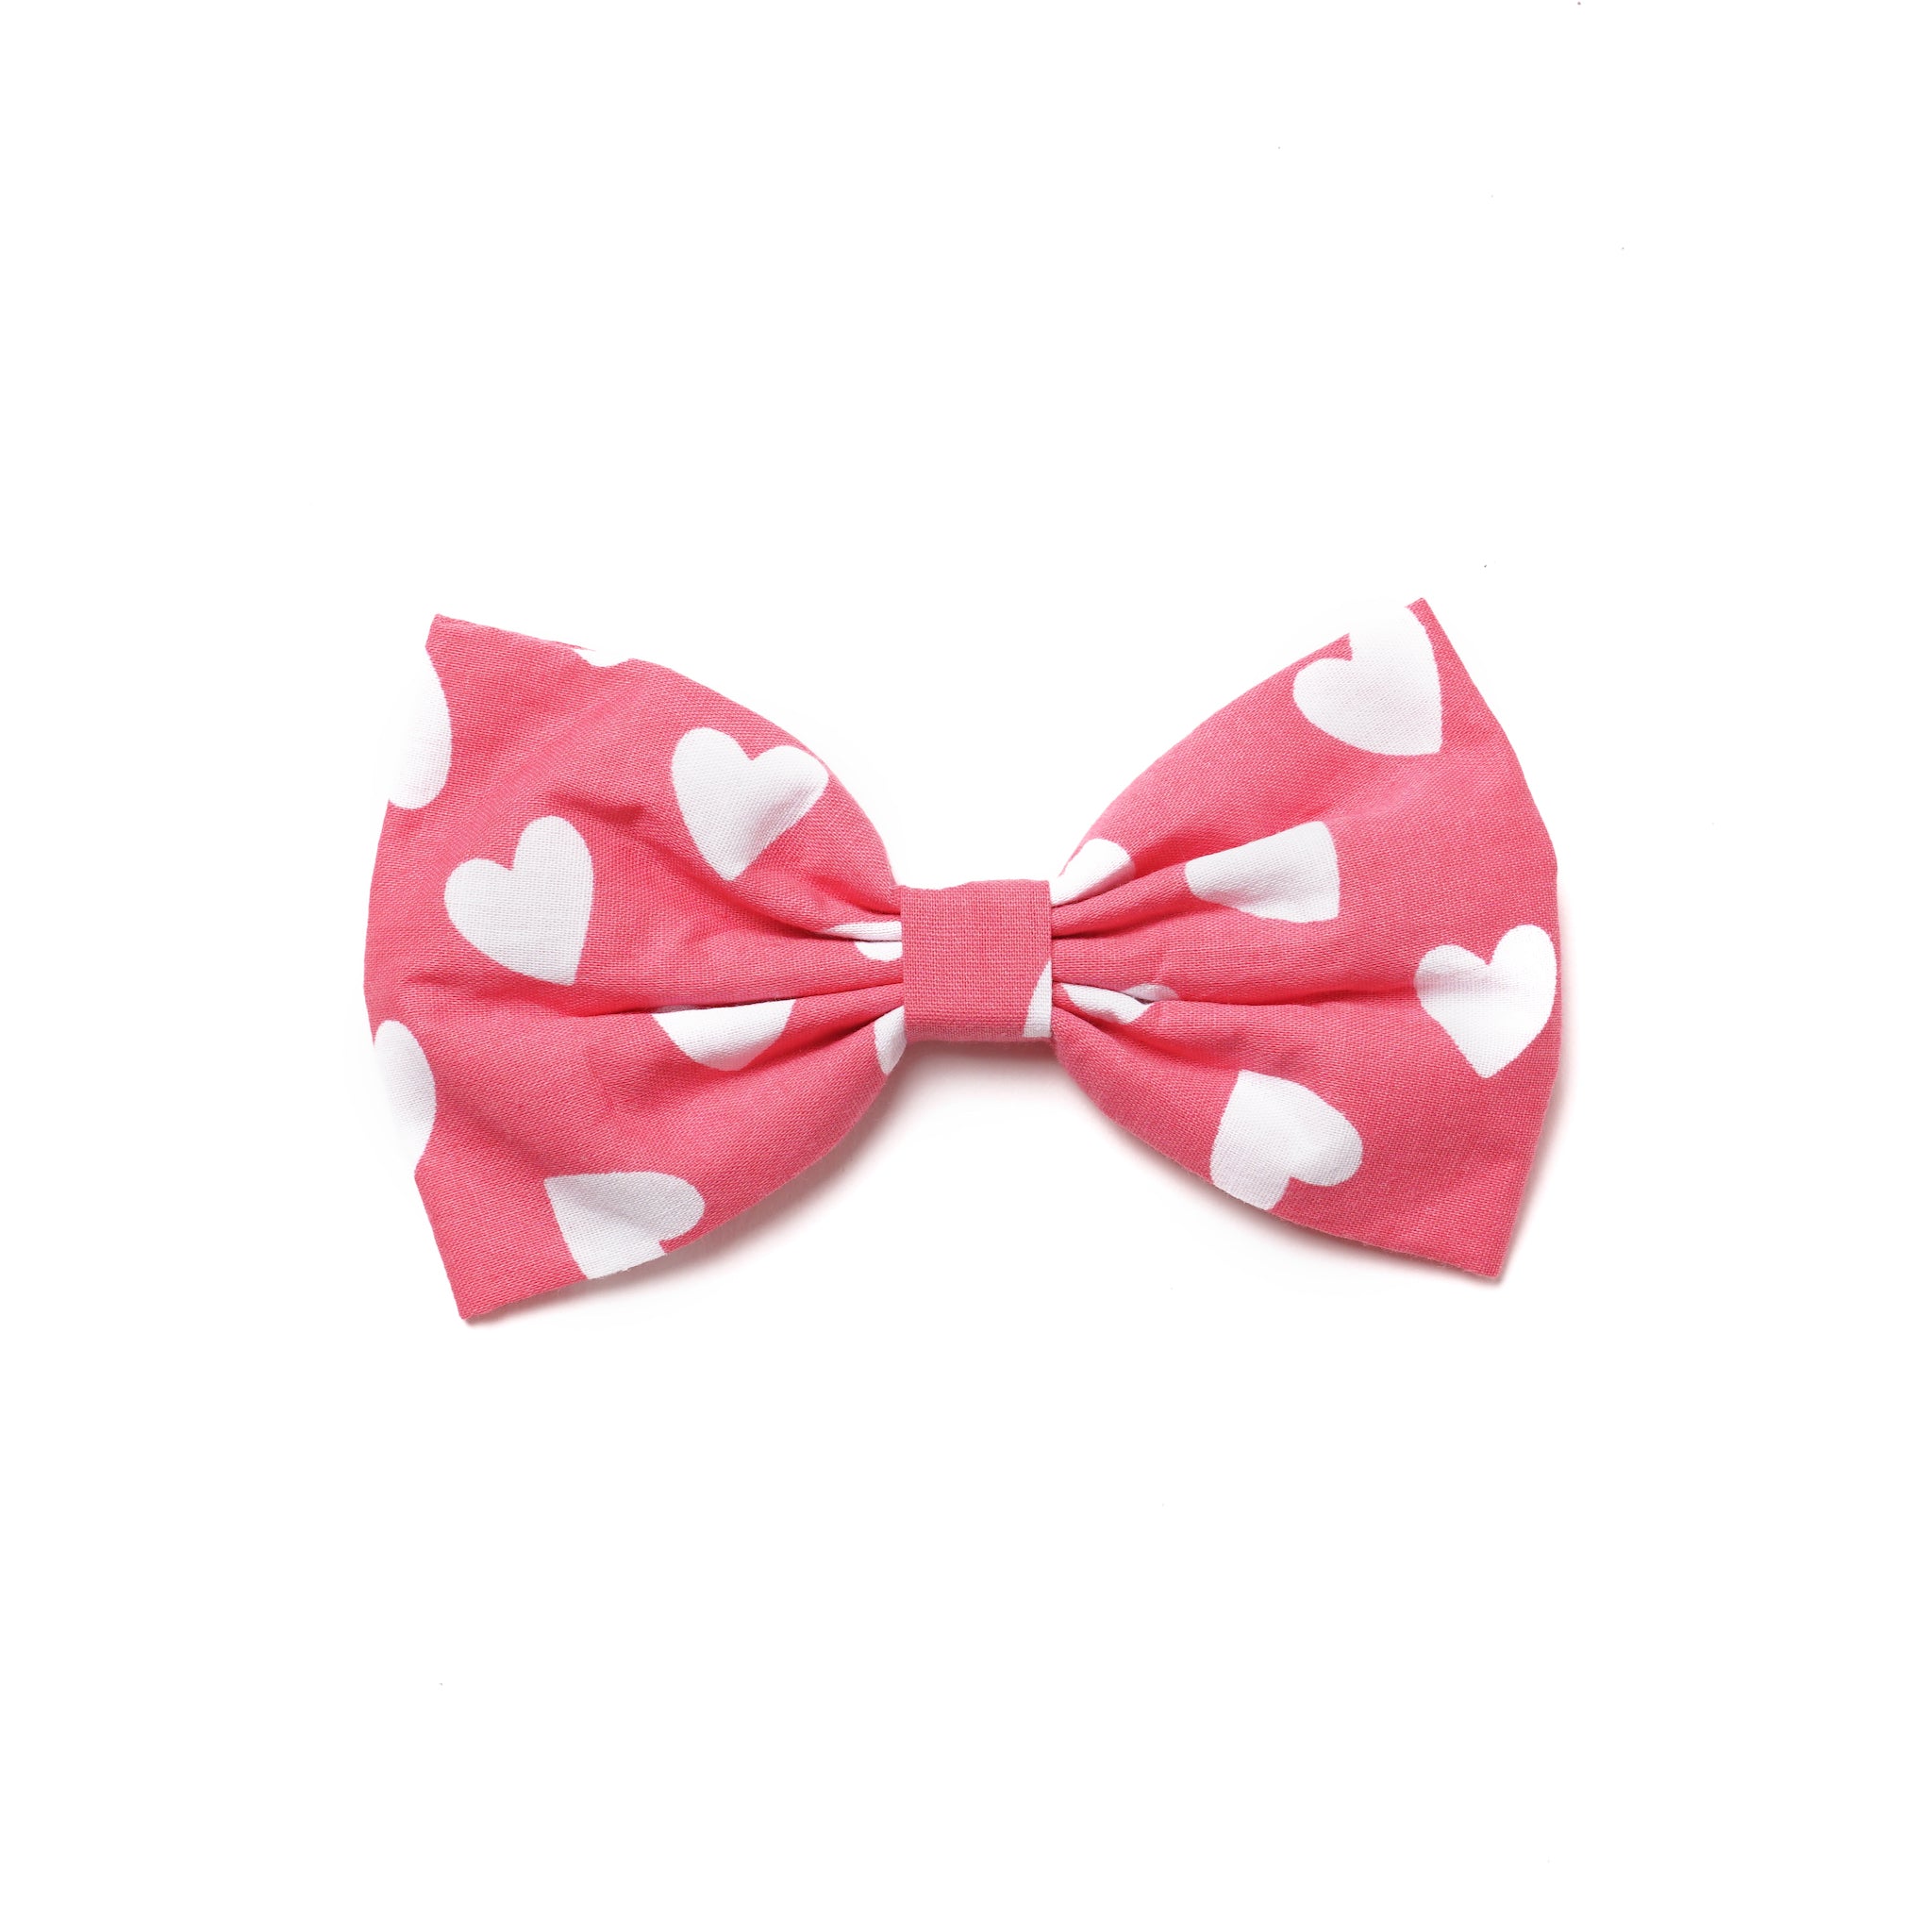 Whole Lot of Love - Bow Tie